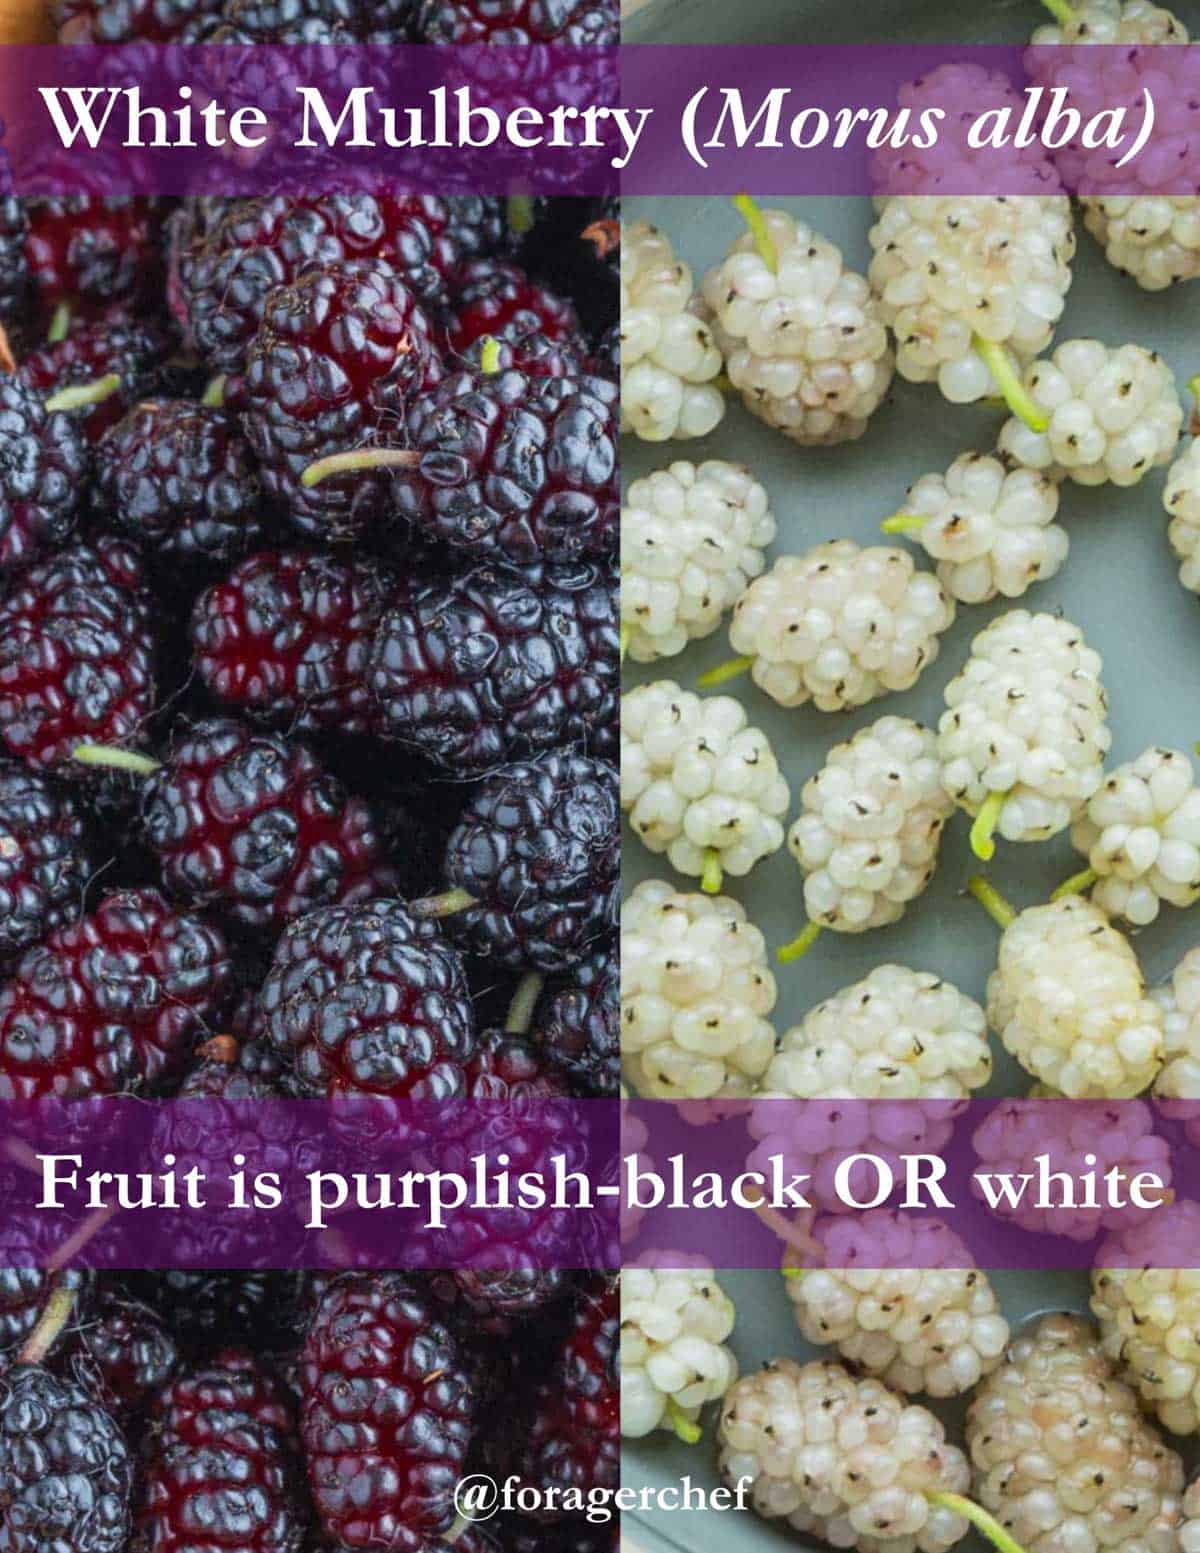 An infographic comparing black and white fruit of white mulberry (Morus alba). 